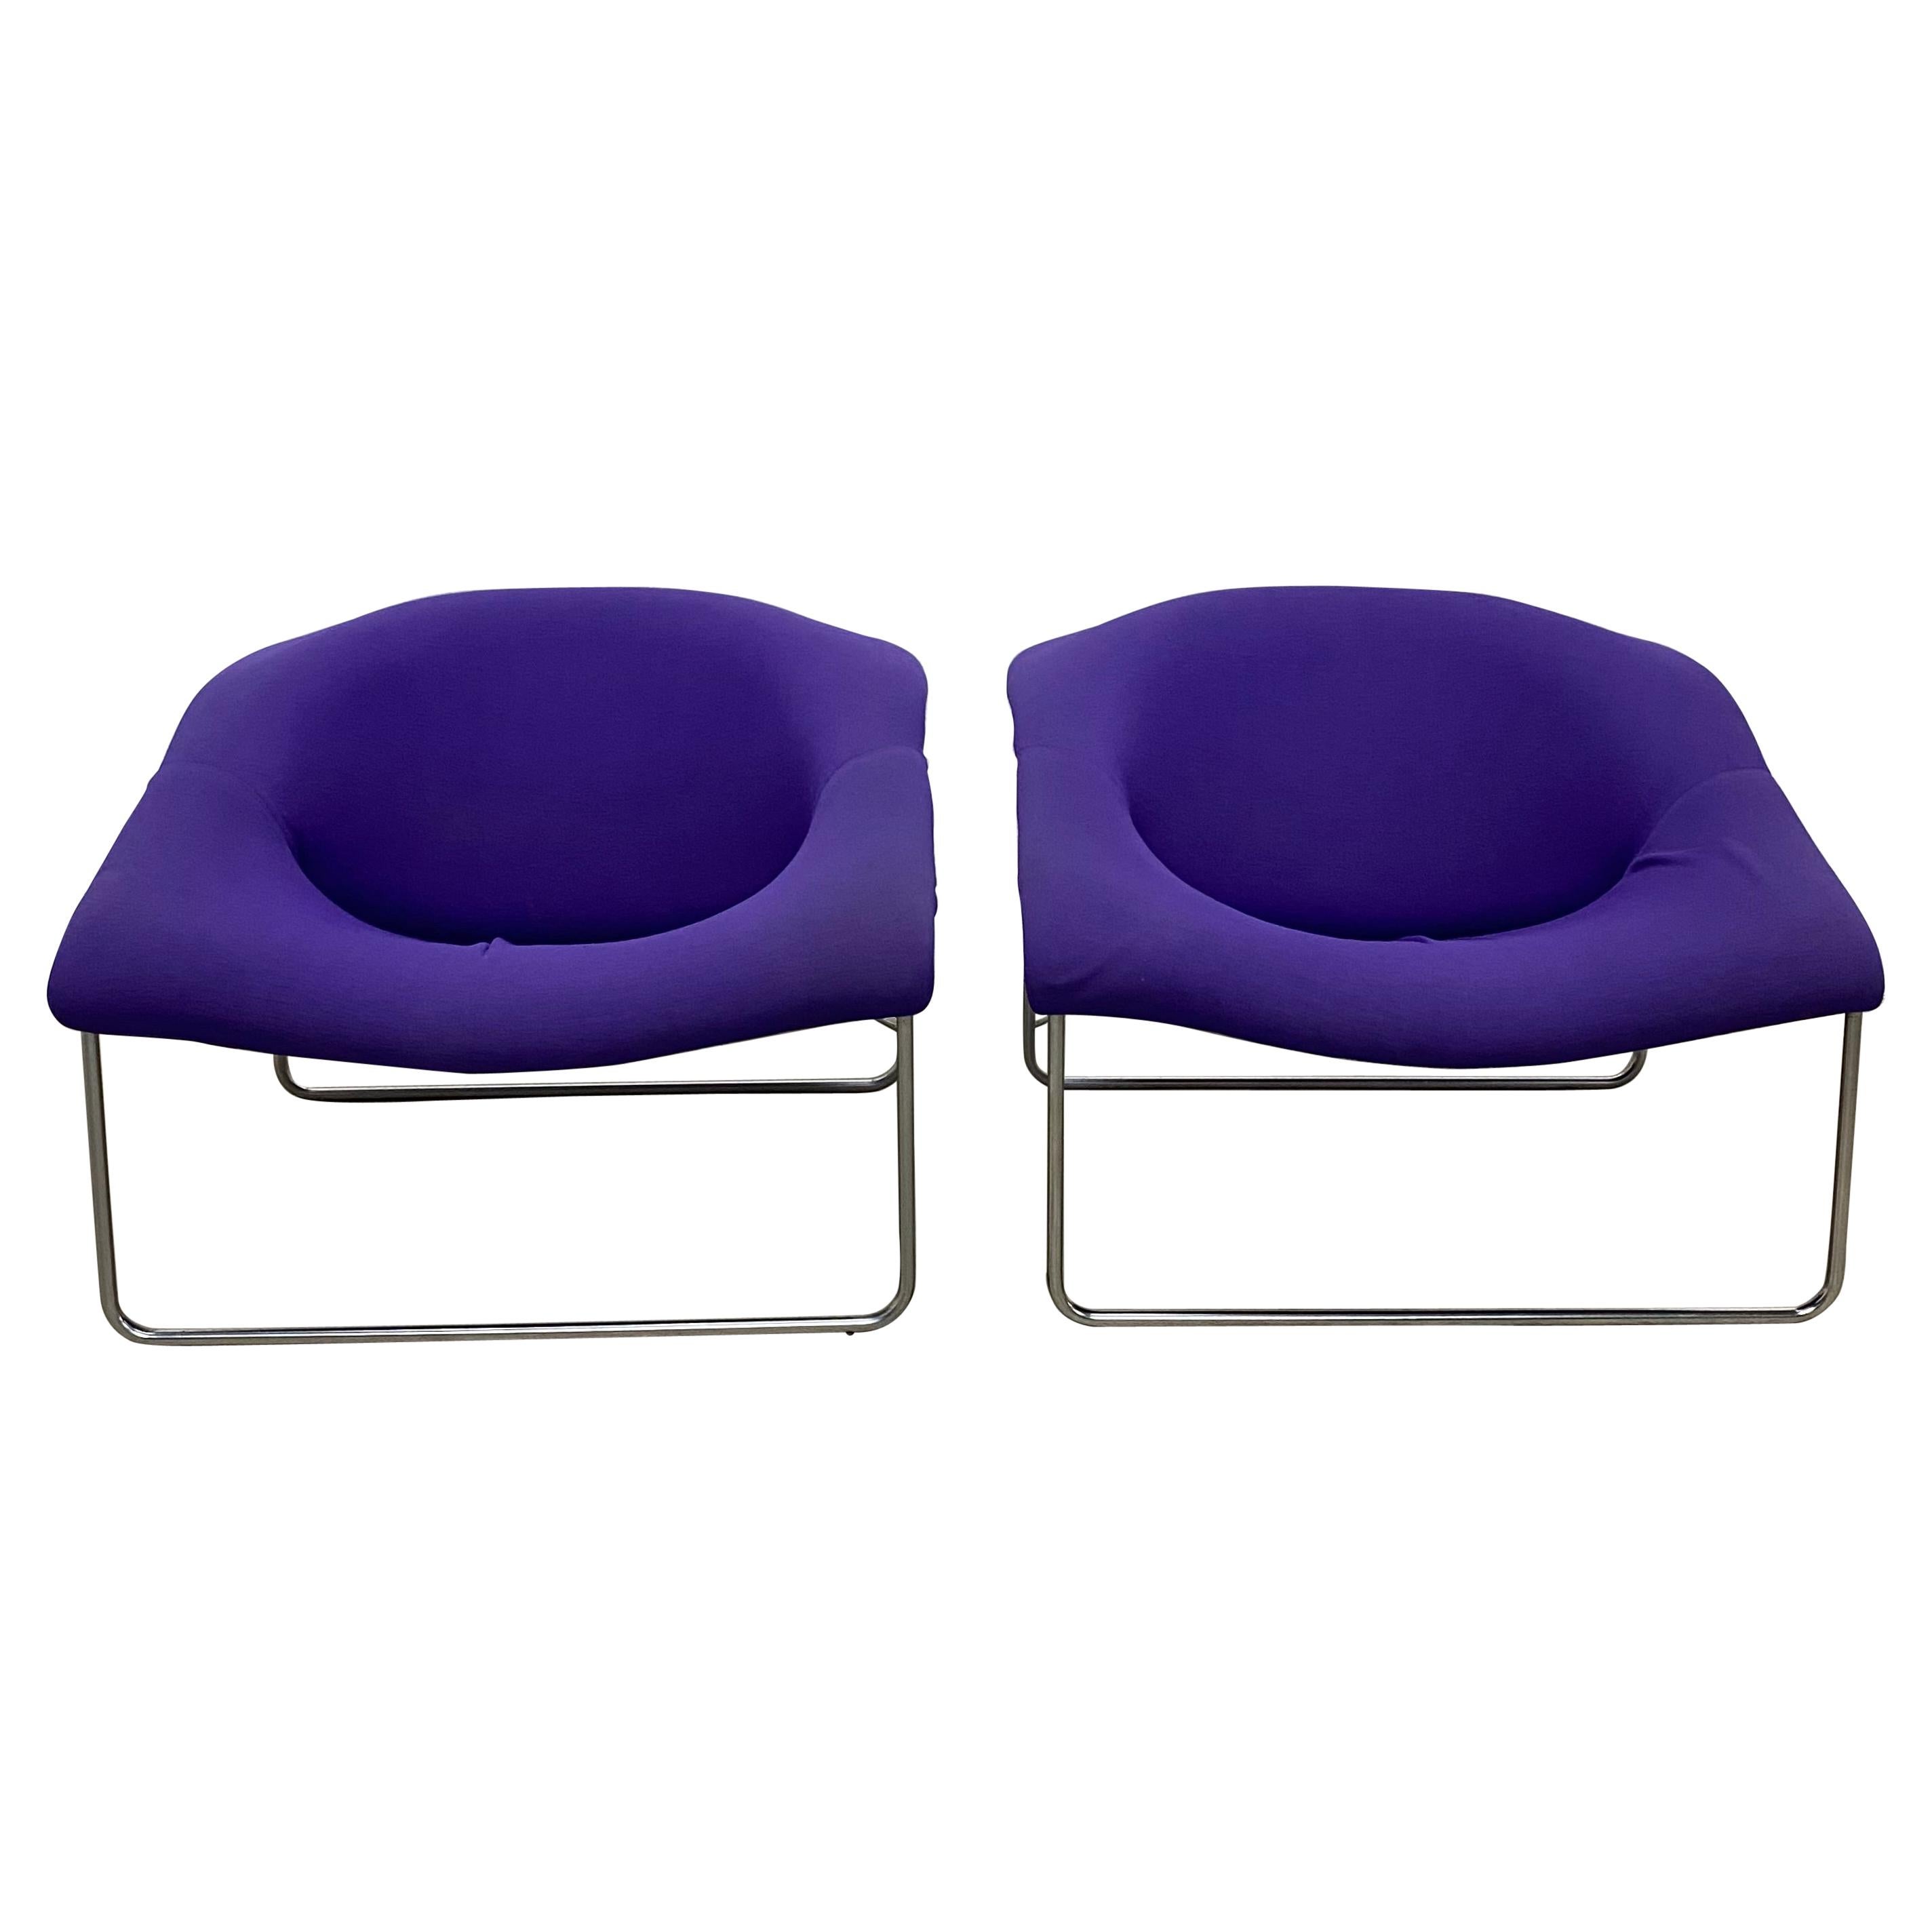 Olivier Mourgue 'Cubique' Lounge Chairs by Airborne International, a Pair